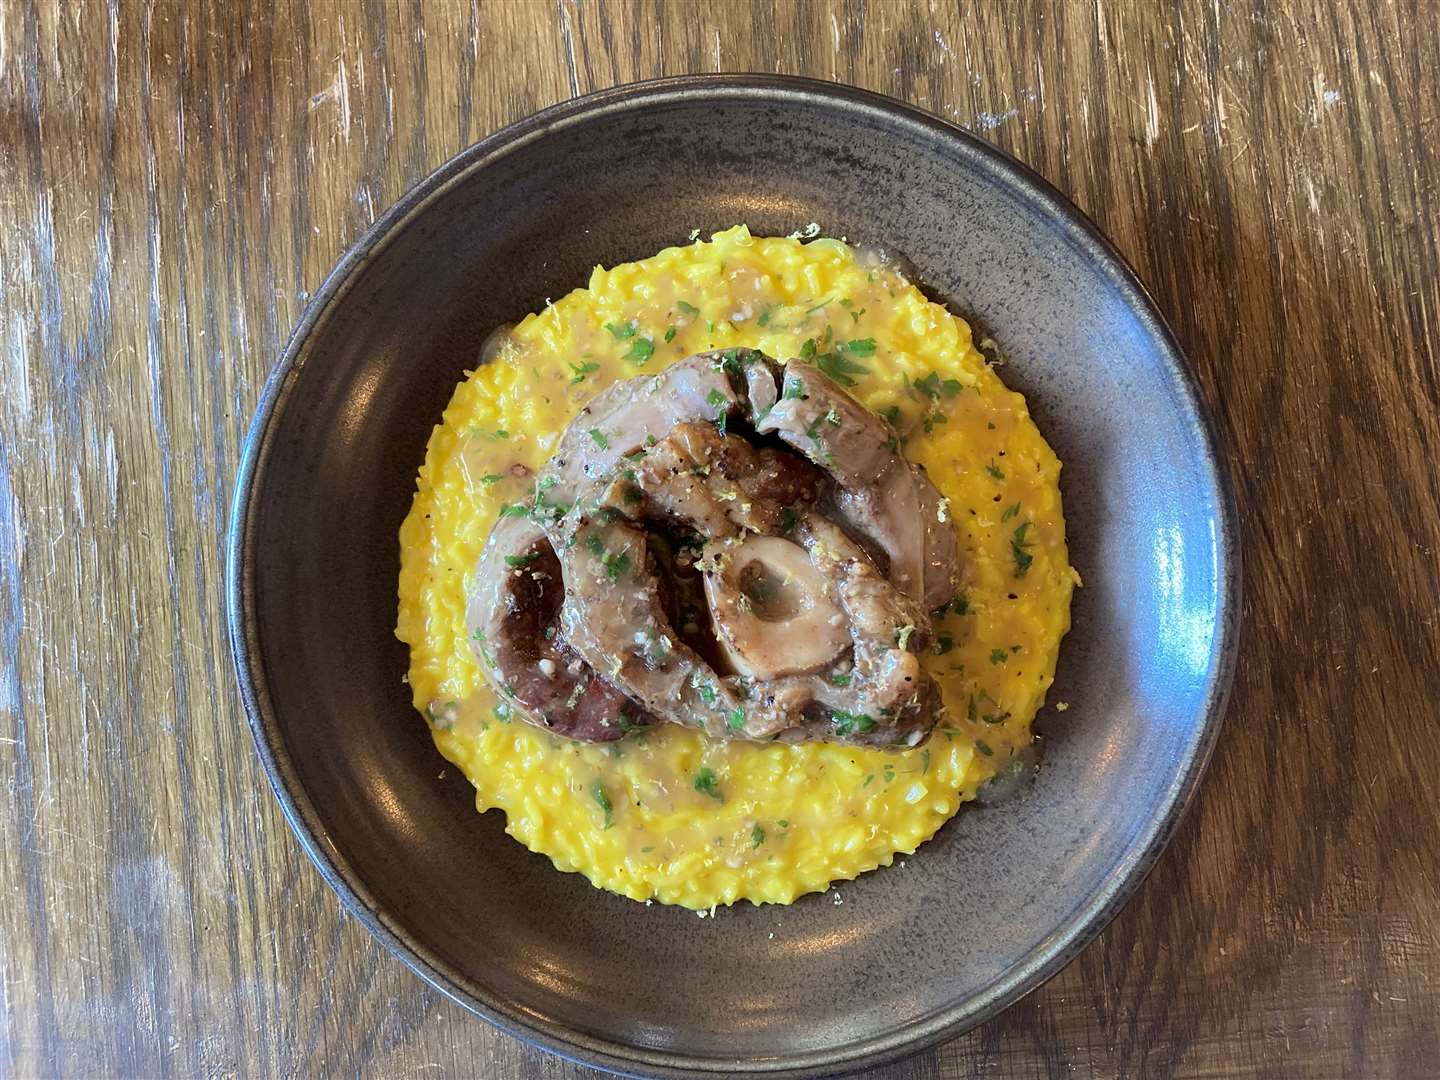 A slow-roasted main course marvel - Ossobuco alla Milanese. Picture: Kev Hurst